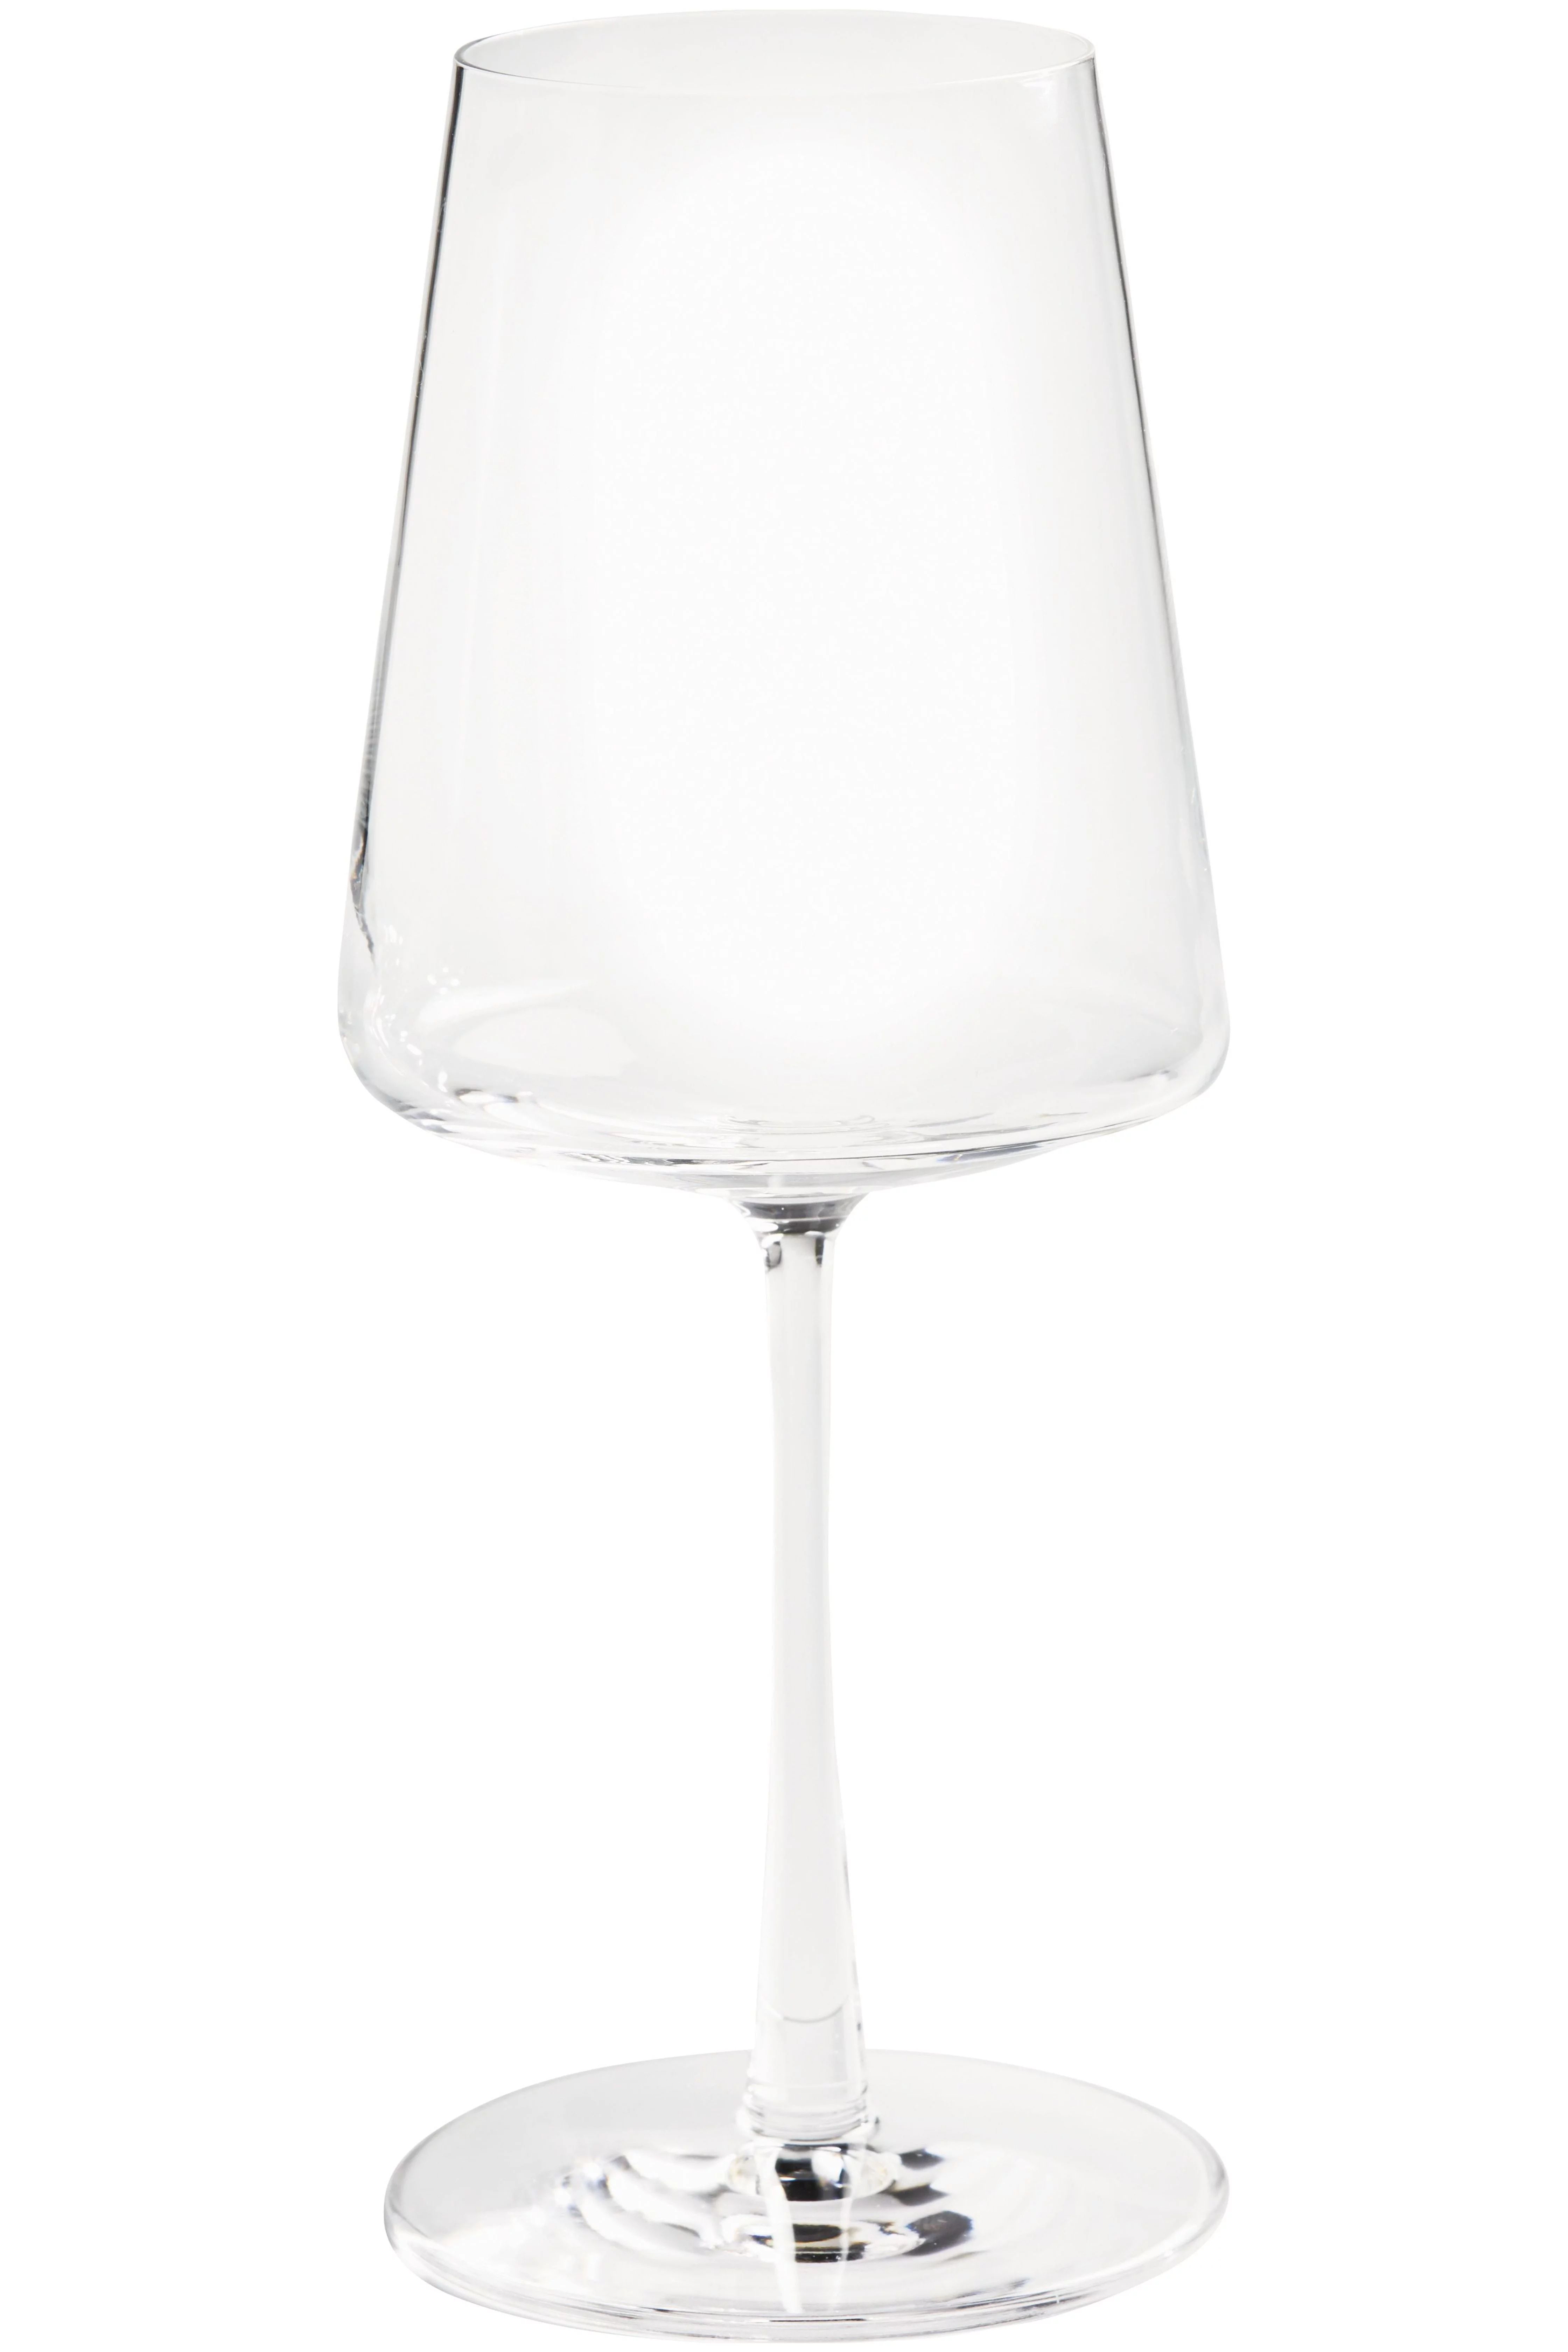 Better Homes & Gardens Clear Flared White Wine Glass with Stem, 4 Pack | Walmart (US)